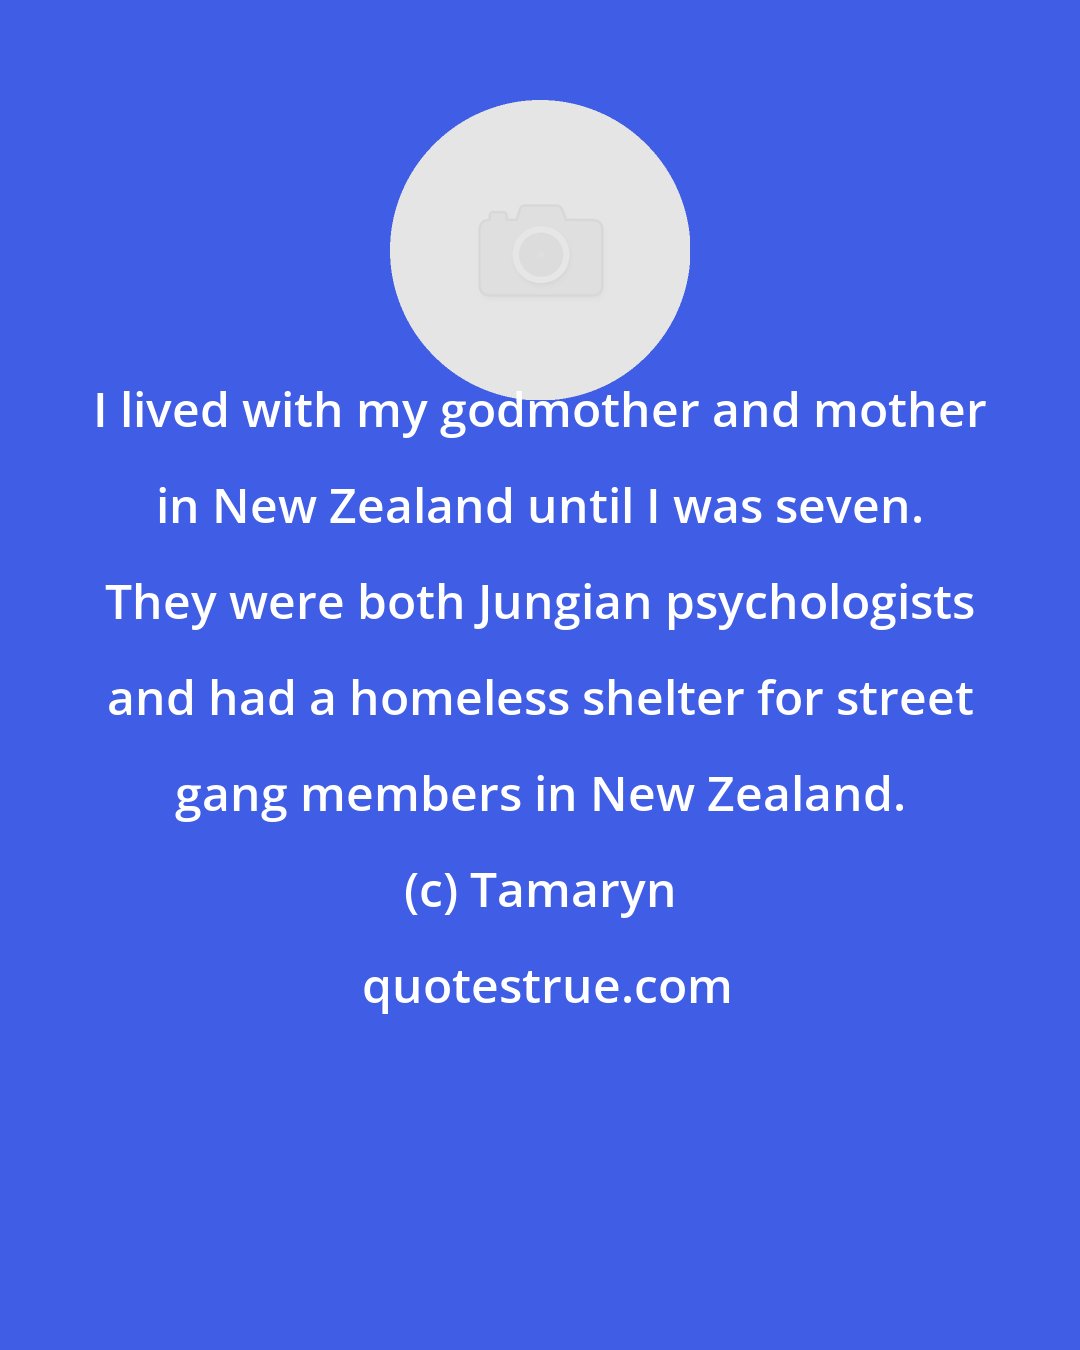 Tamaryn: I lived with my godmother and mother in New Zealand until I was seven. They were both Jungian psychologists and had a homeless shelter for street gang members in New Zealand.